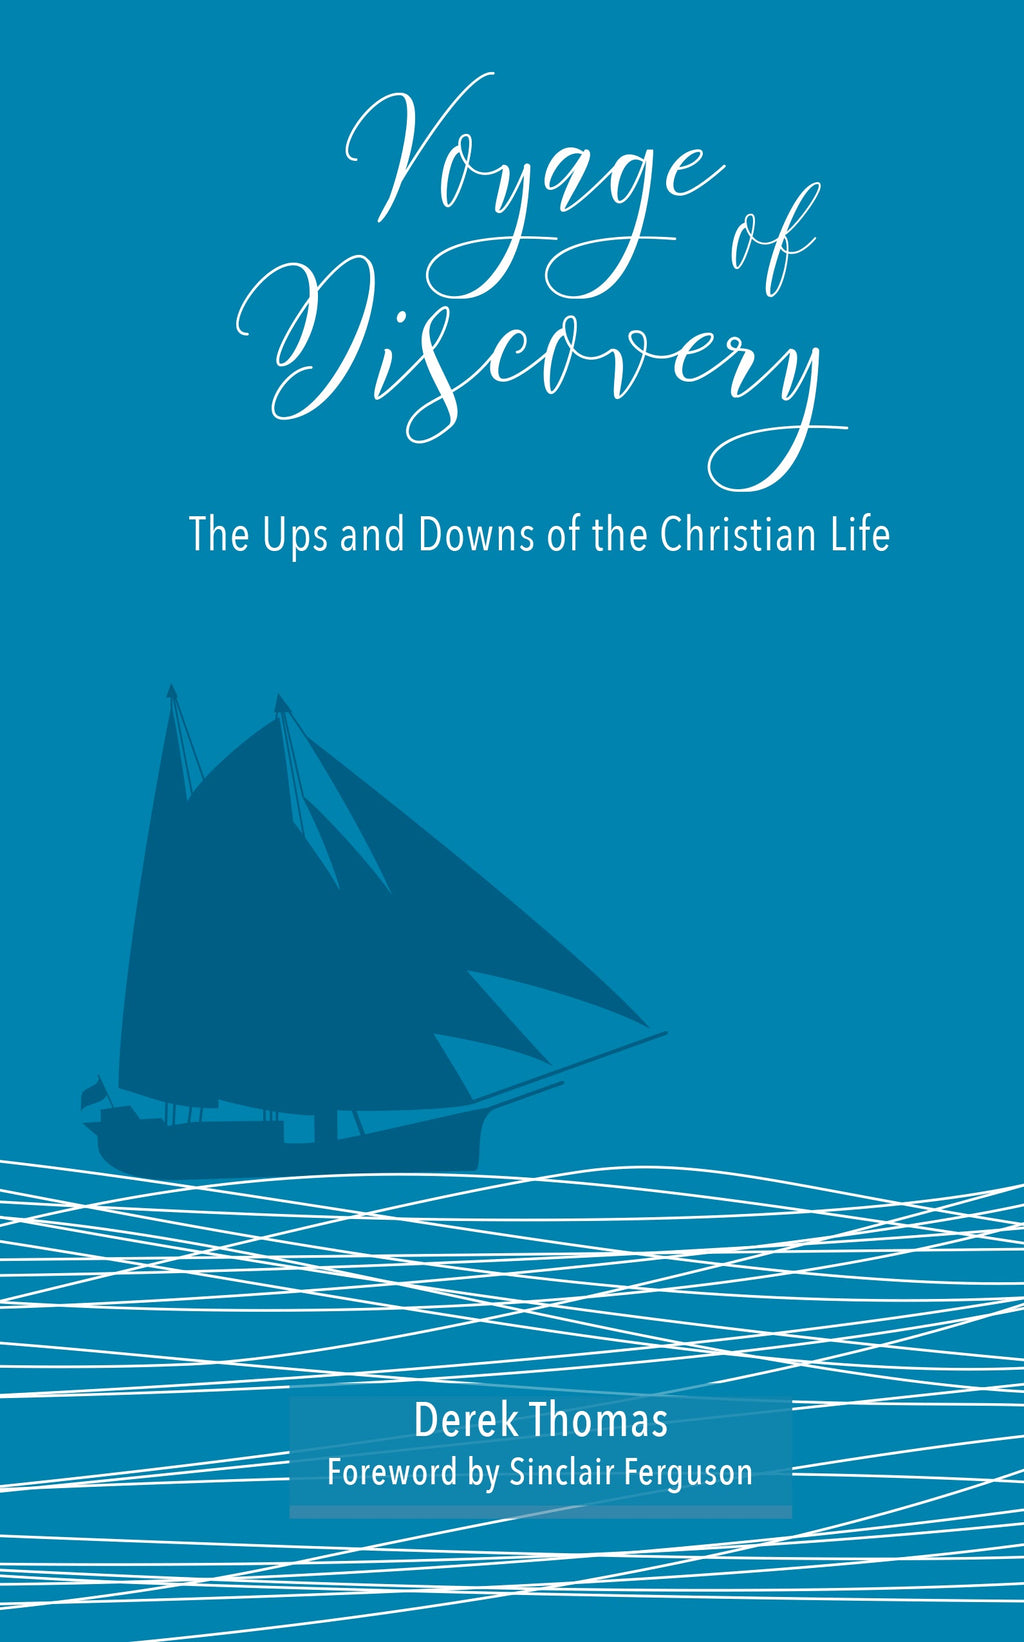 Voyage of Discovery: The Ups and Downs of the Christian Life